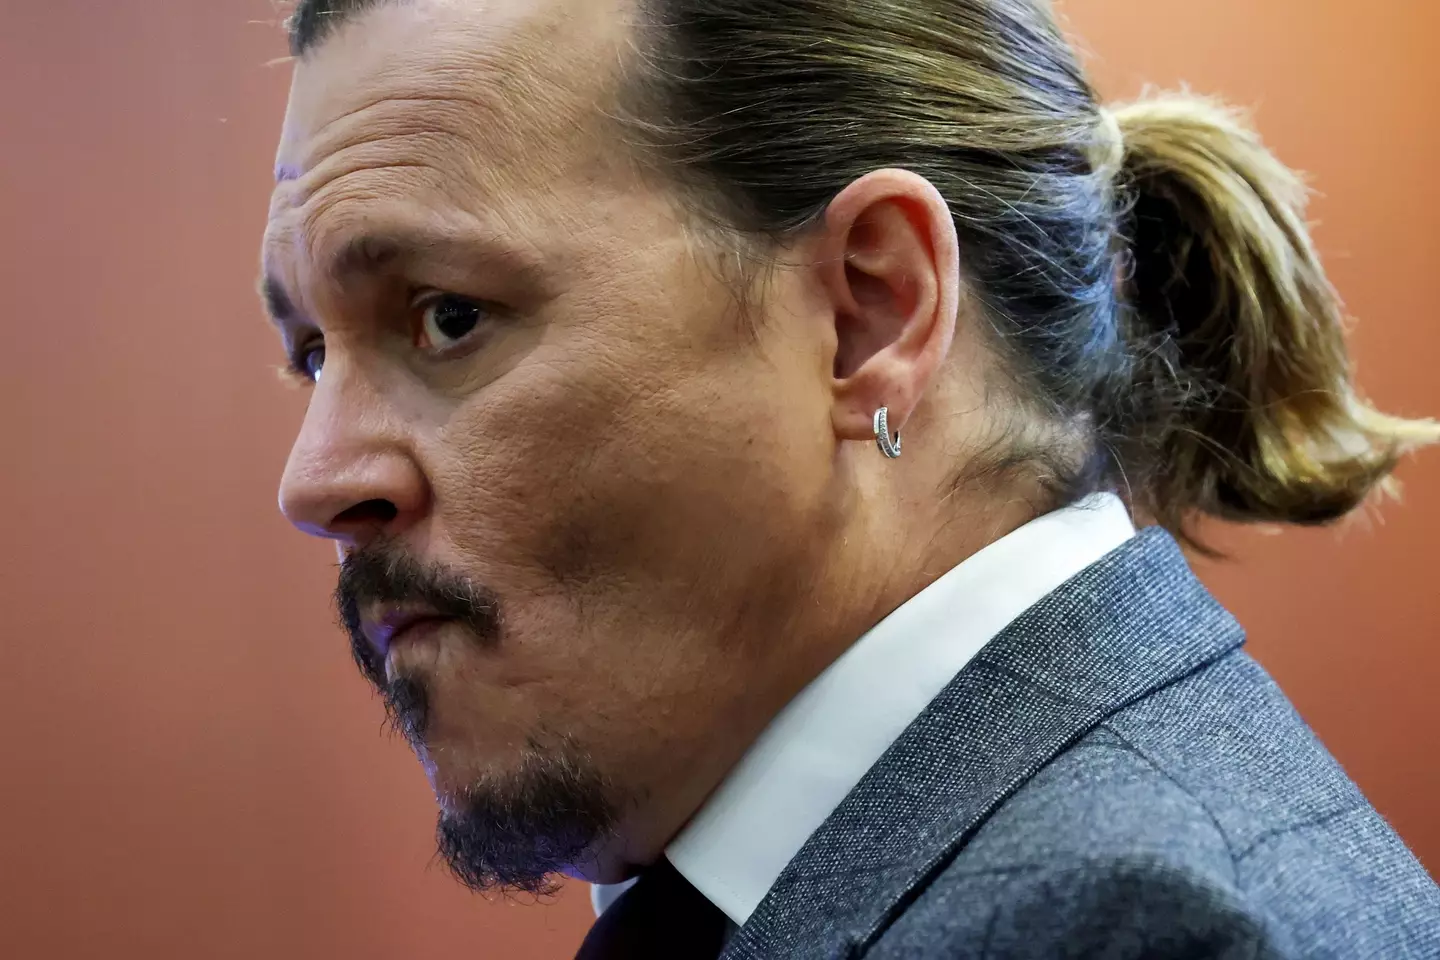 Johnny Depp earlier said he never encouraged his daughter to smoke weed.